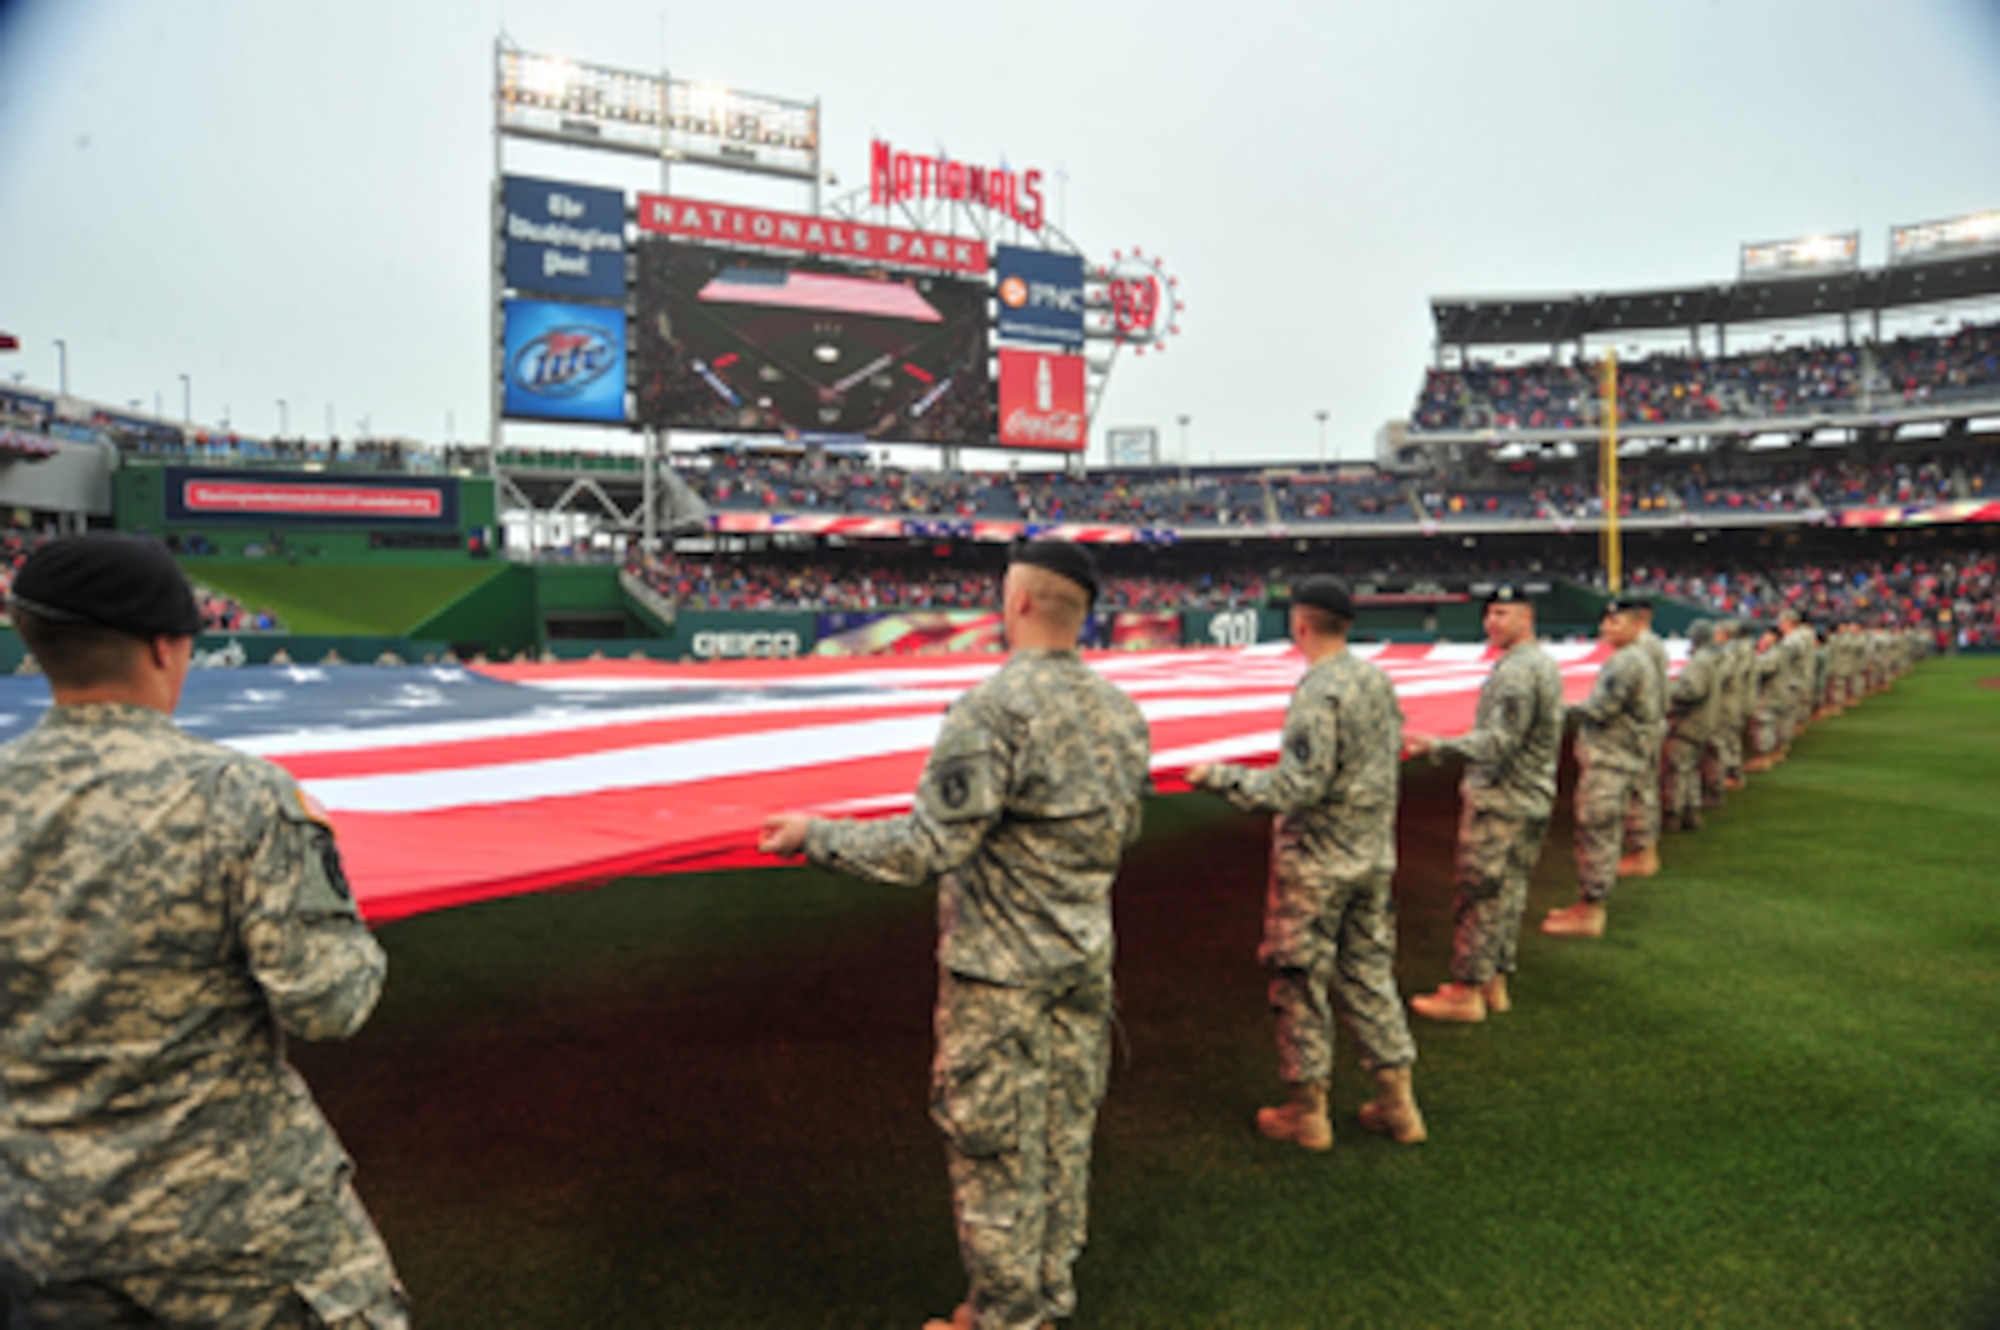 Members of the D.C. National Guard hold a football-field sized American flag on the outfield during pre-game ceremonies for Opening Day at Nationals Park in Washington, D.C. March 31, 2011. U.S. Air Force Photo by Tech. Sgt. Tyrell Heaton 